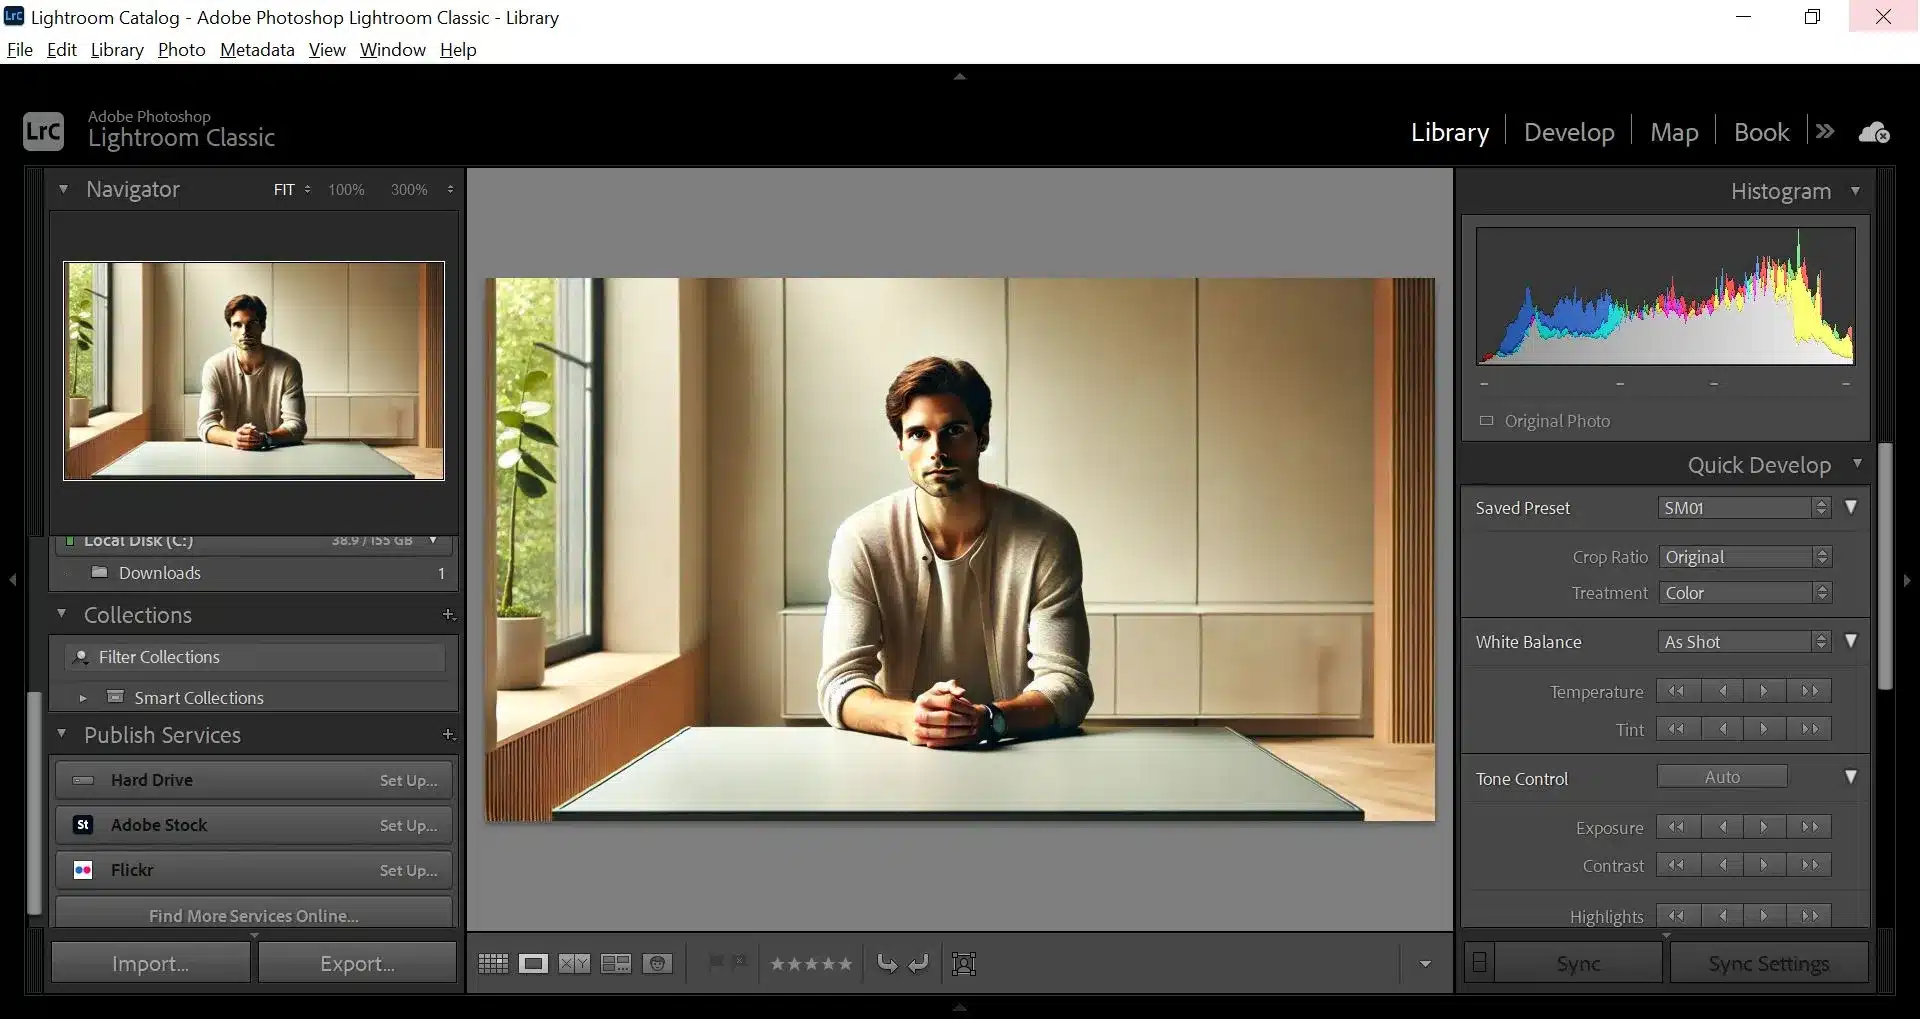 Adobe Lightroom interface displaying the editing process of a portrait of a man sitting at a table. The interface shows various editing tools and panels, including histogram and quick develop options.